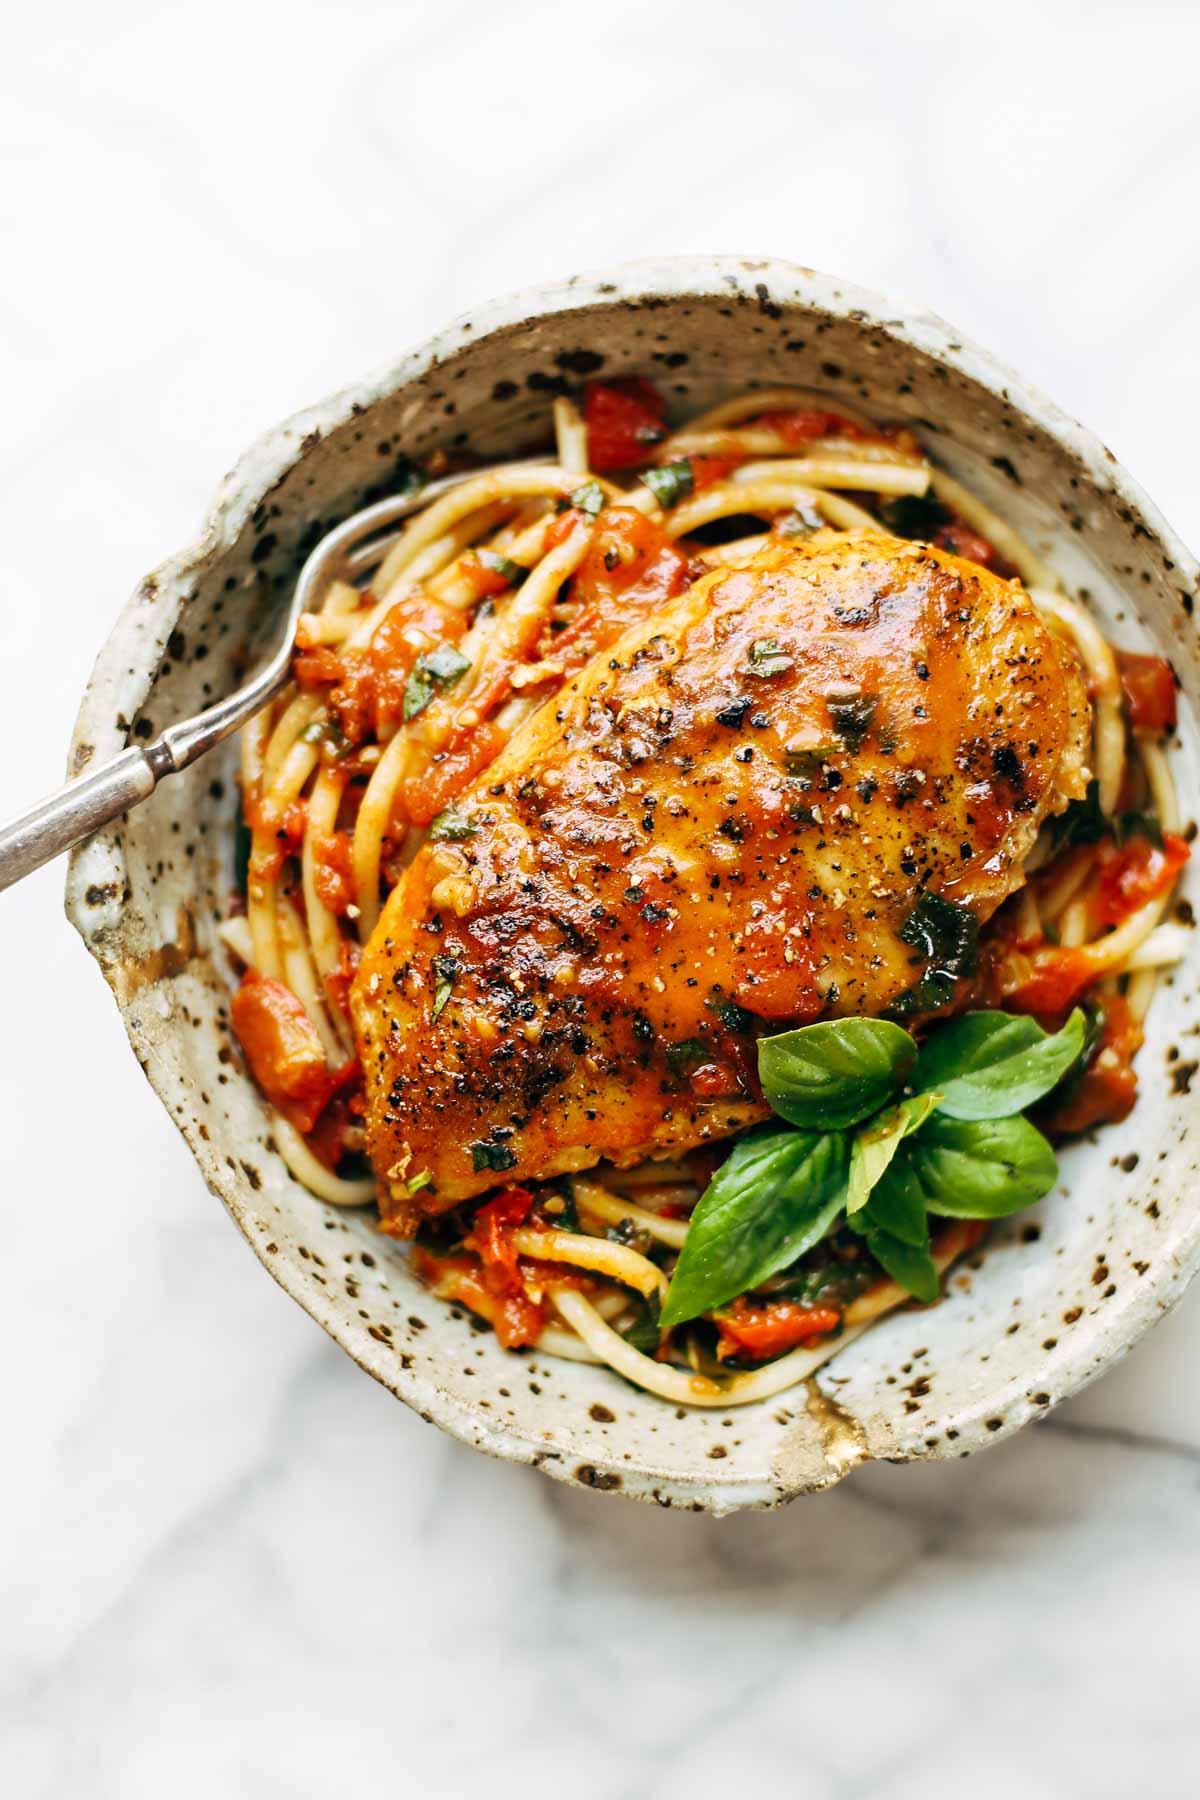 Garlic Basil Chicken with Tomato Butter Sauce from Pinch of Yum | foodiecrush.com 